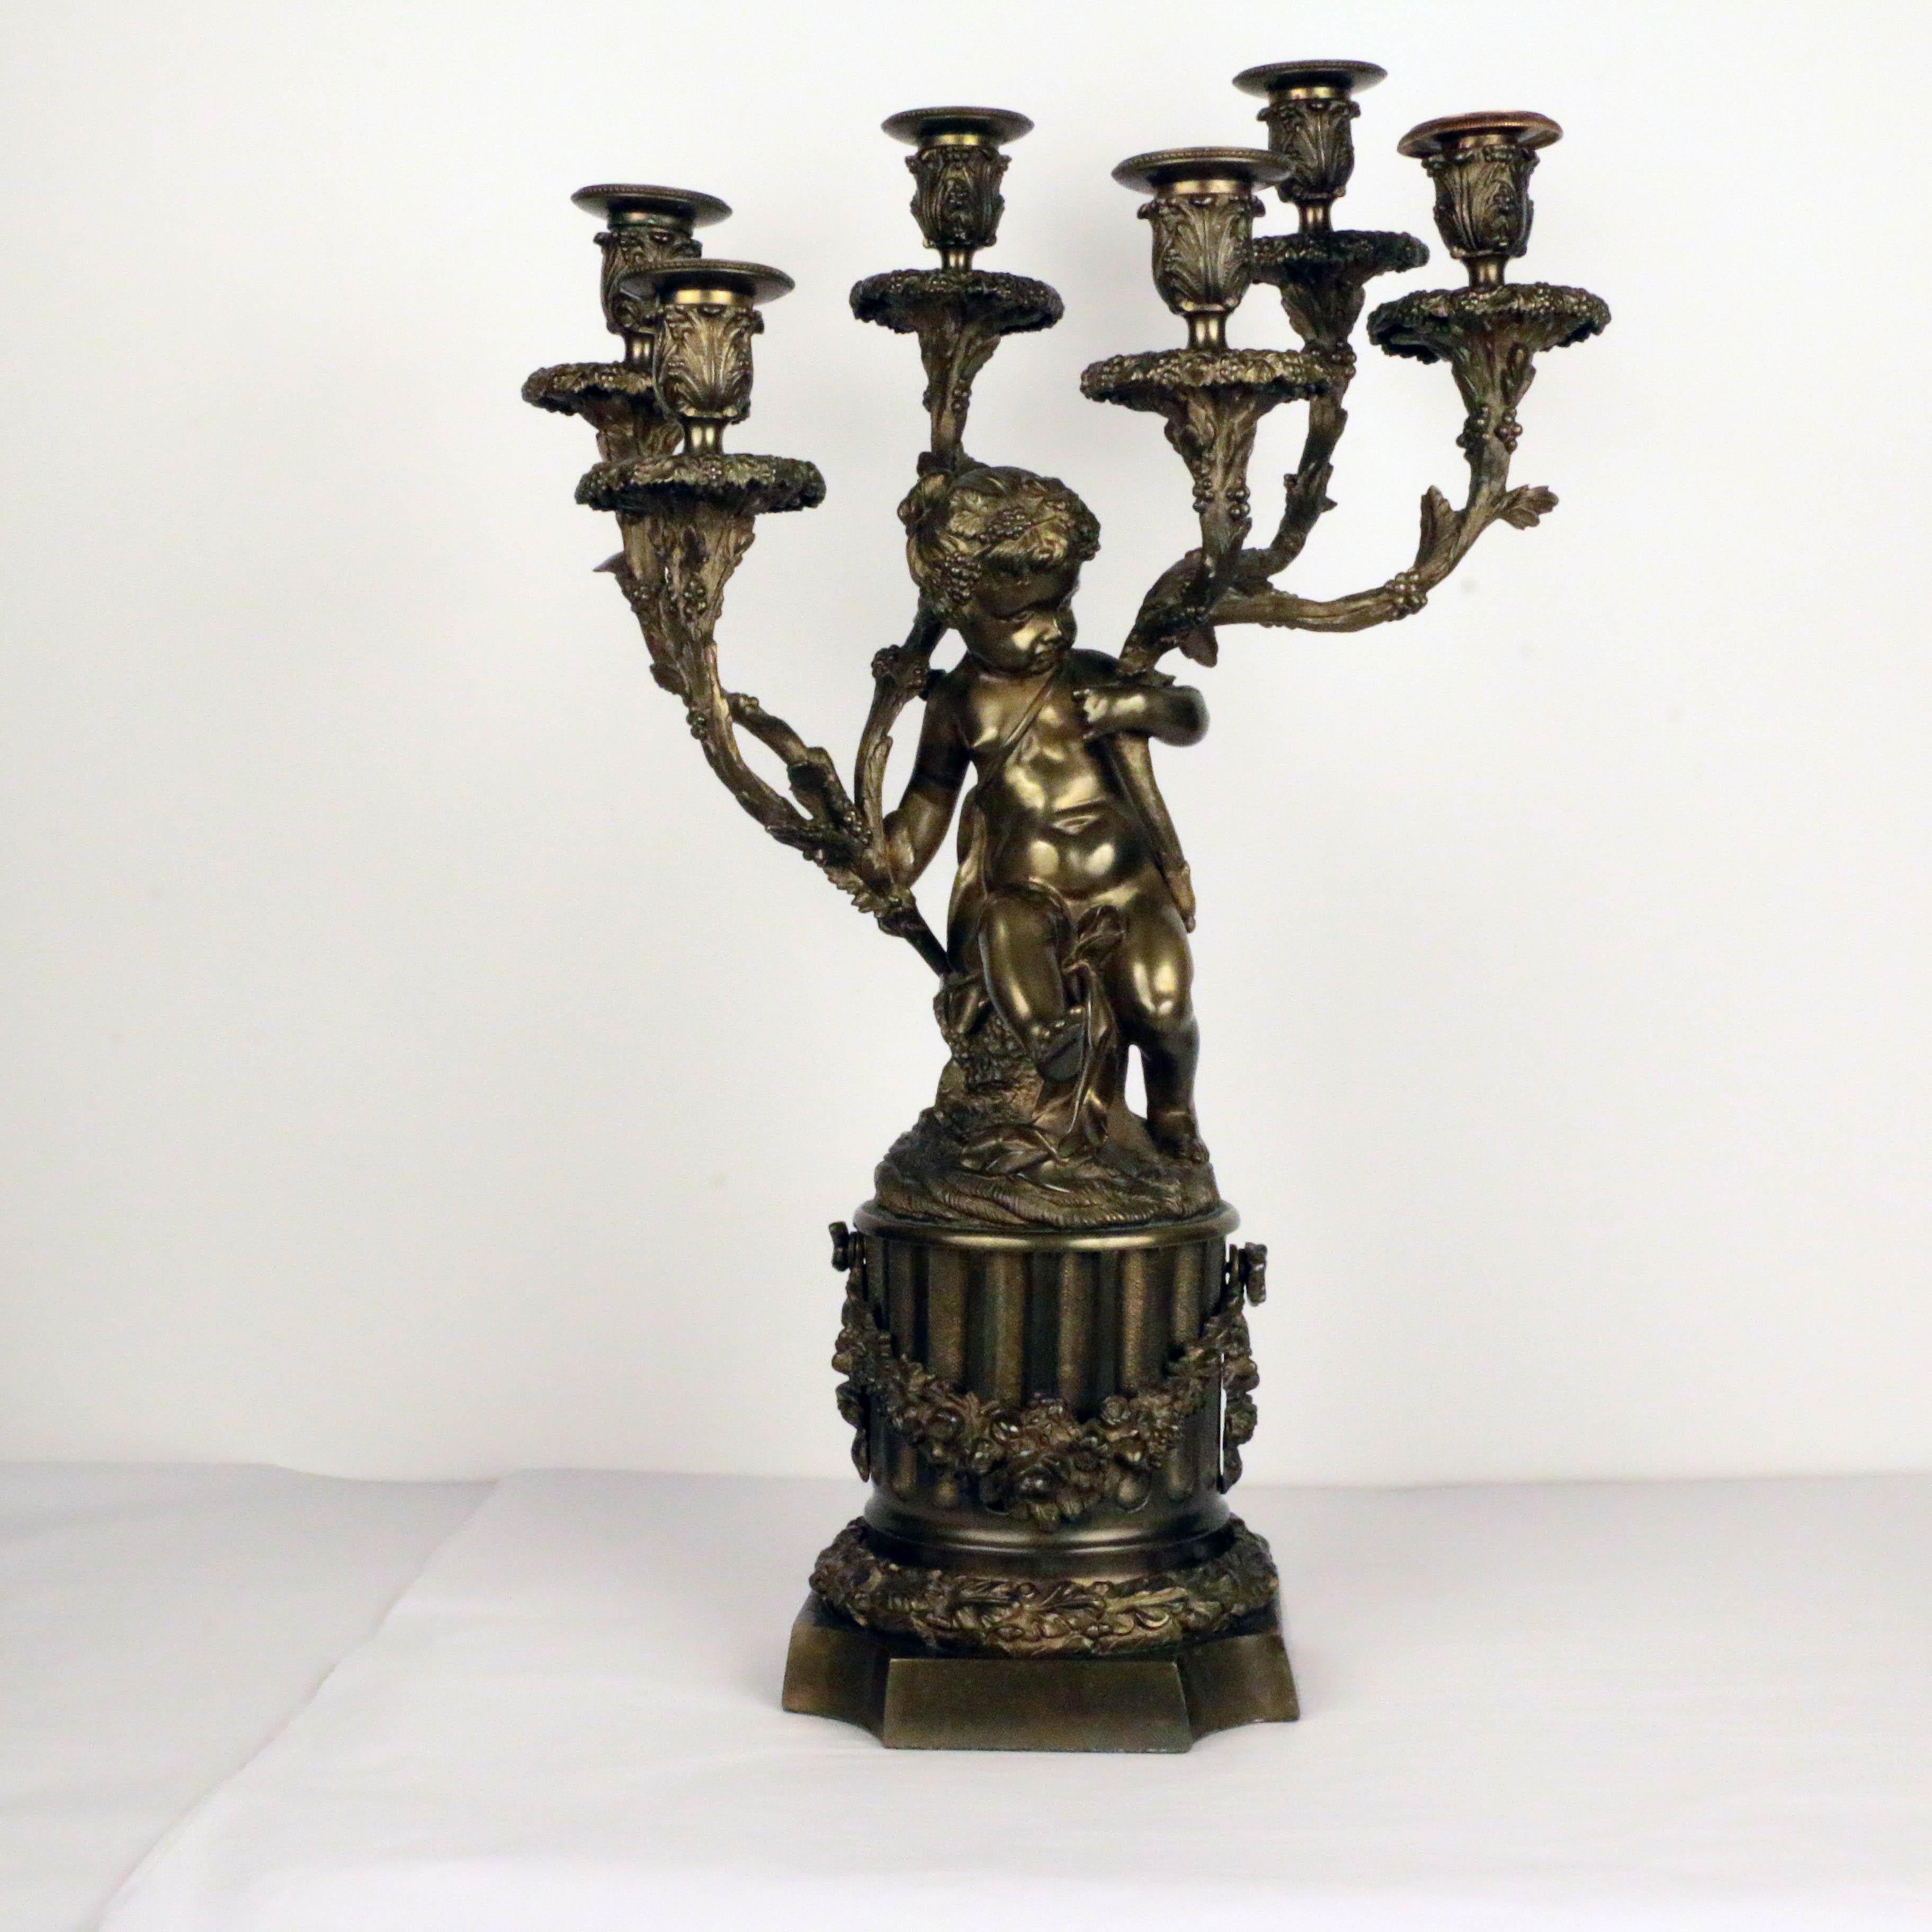 This imposing pair of bronze figural six-light candelabra, one modelled as a putto, the other as a satyr, is in the manner of Clodion.  Each is mounted on fluted and garlanded columns. This playful pair are crisply modelled with excellent